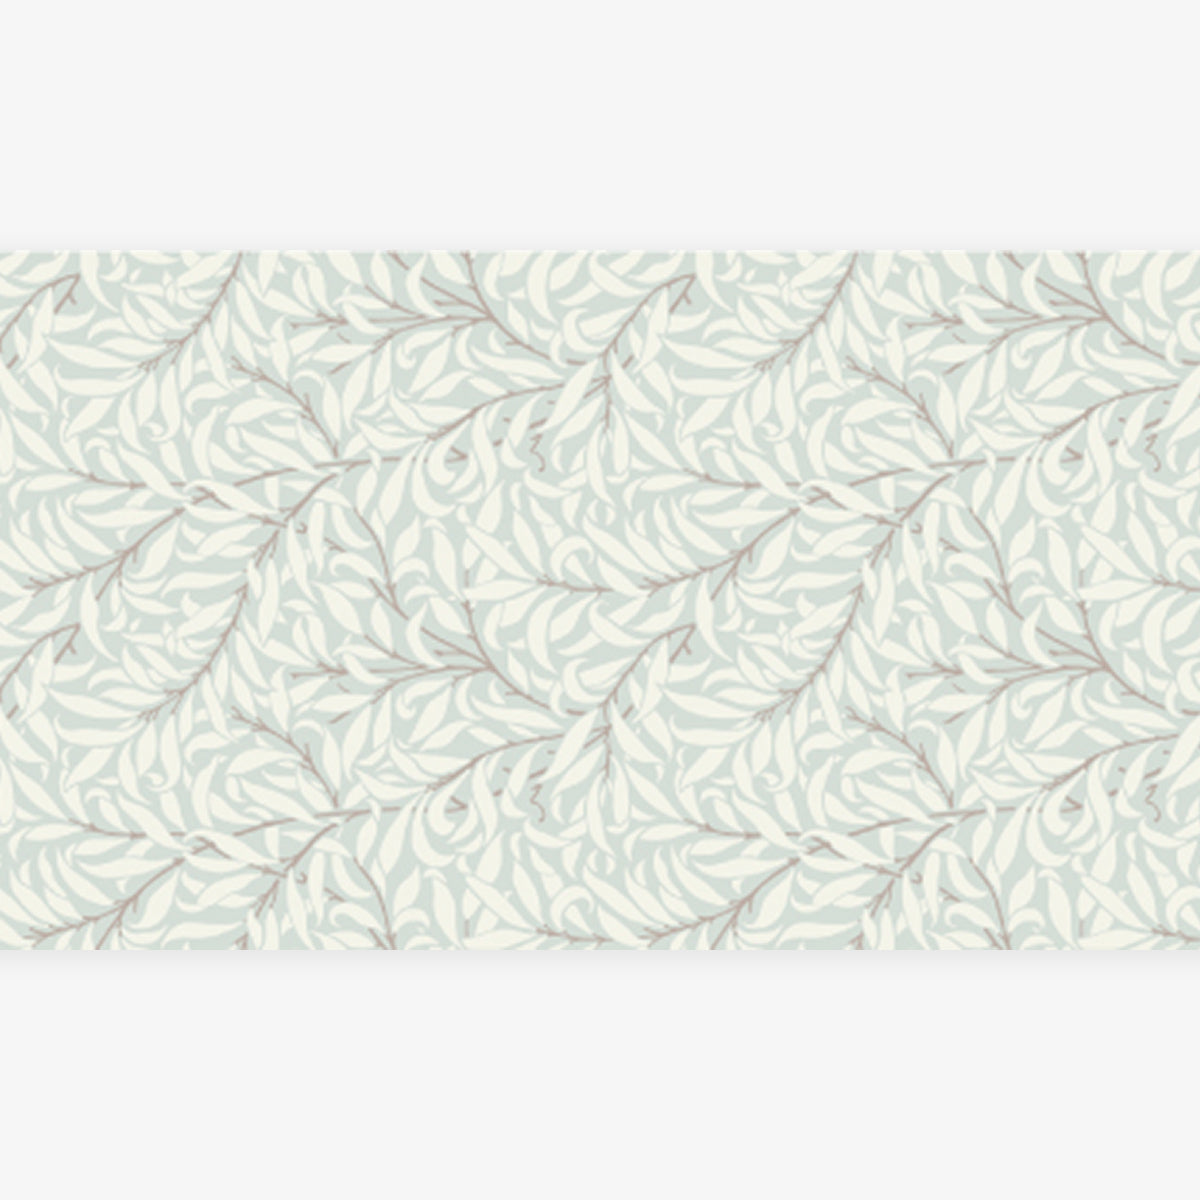 MT MASKING TAPE // WILLIAM MORRIS & CO. PURE WILLOW BOUGH EGGSHELL:CHALK